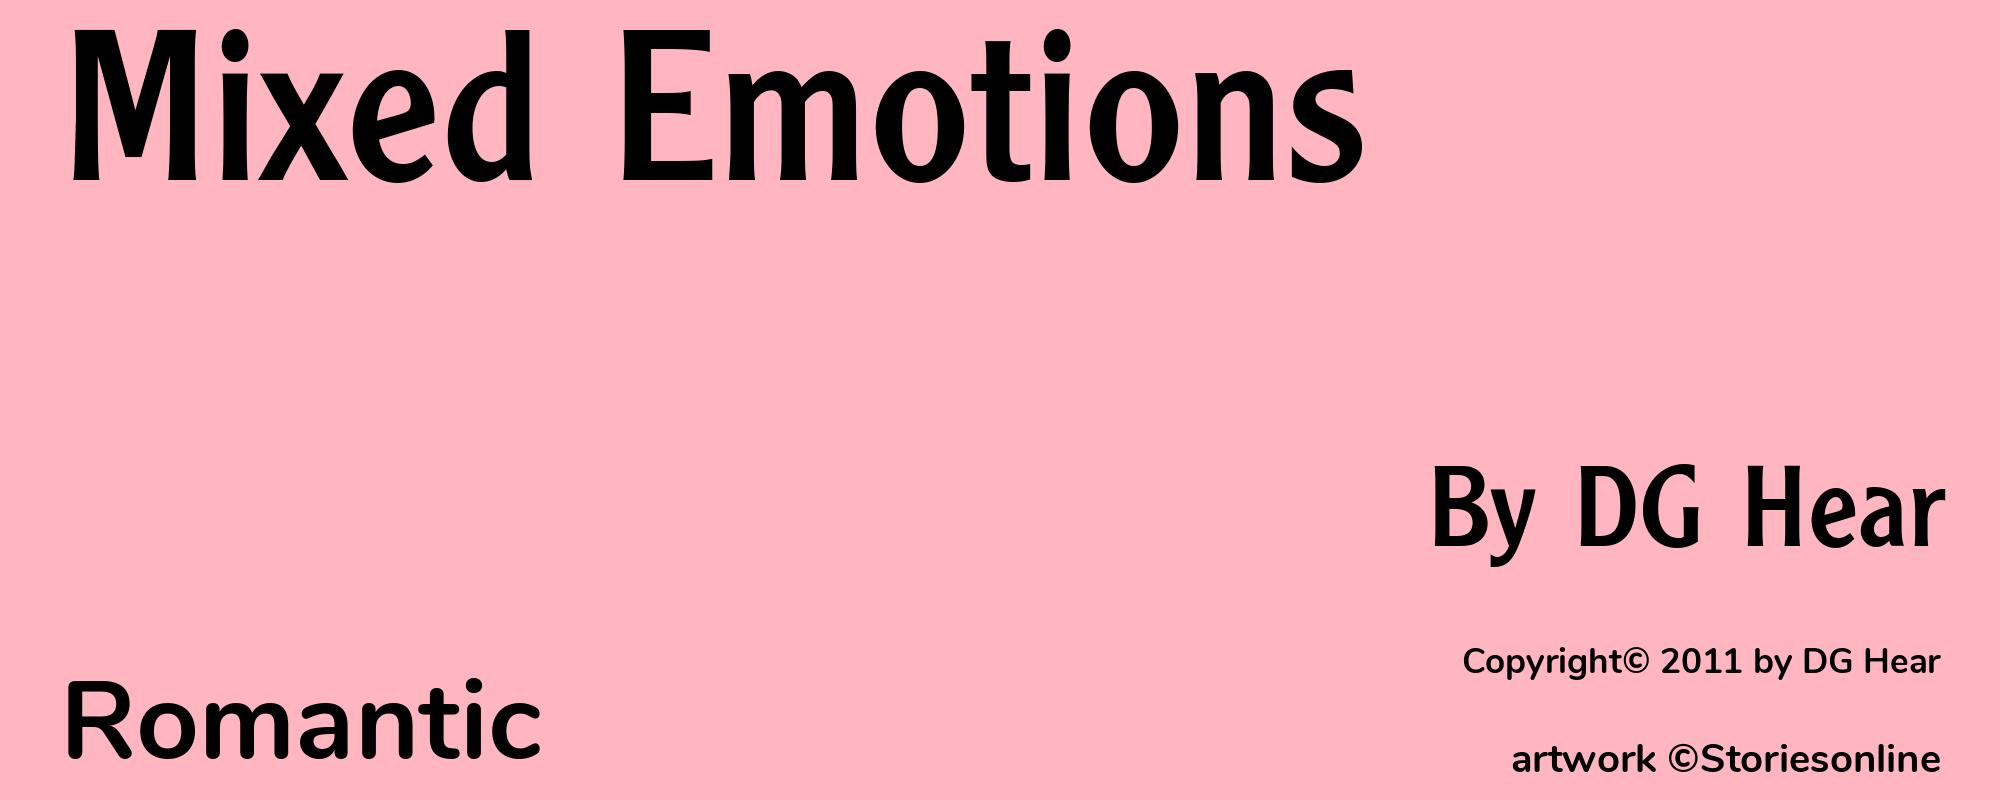 Mixed Emotions - Cover